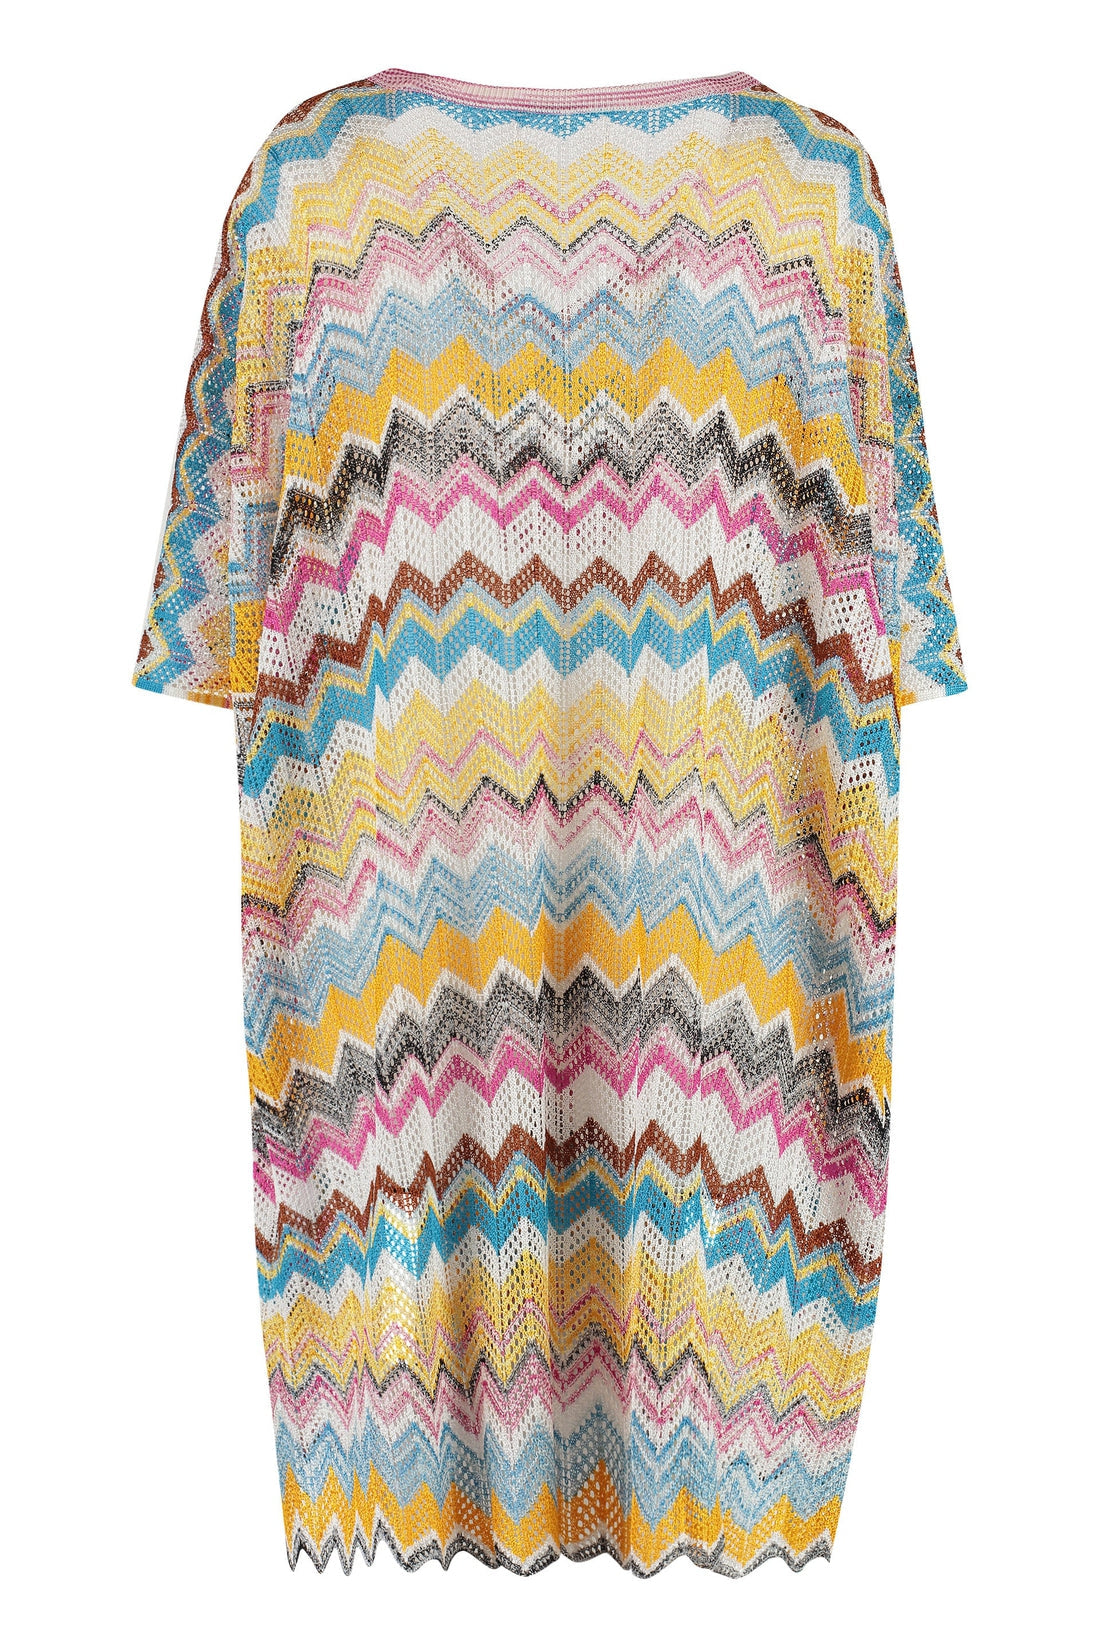 Missoni-OUTLET-SALE-Knitted cover-up dress-ARCHIVIST